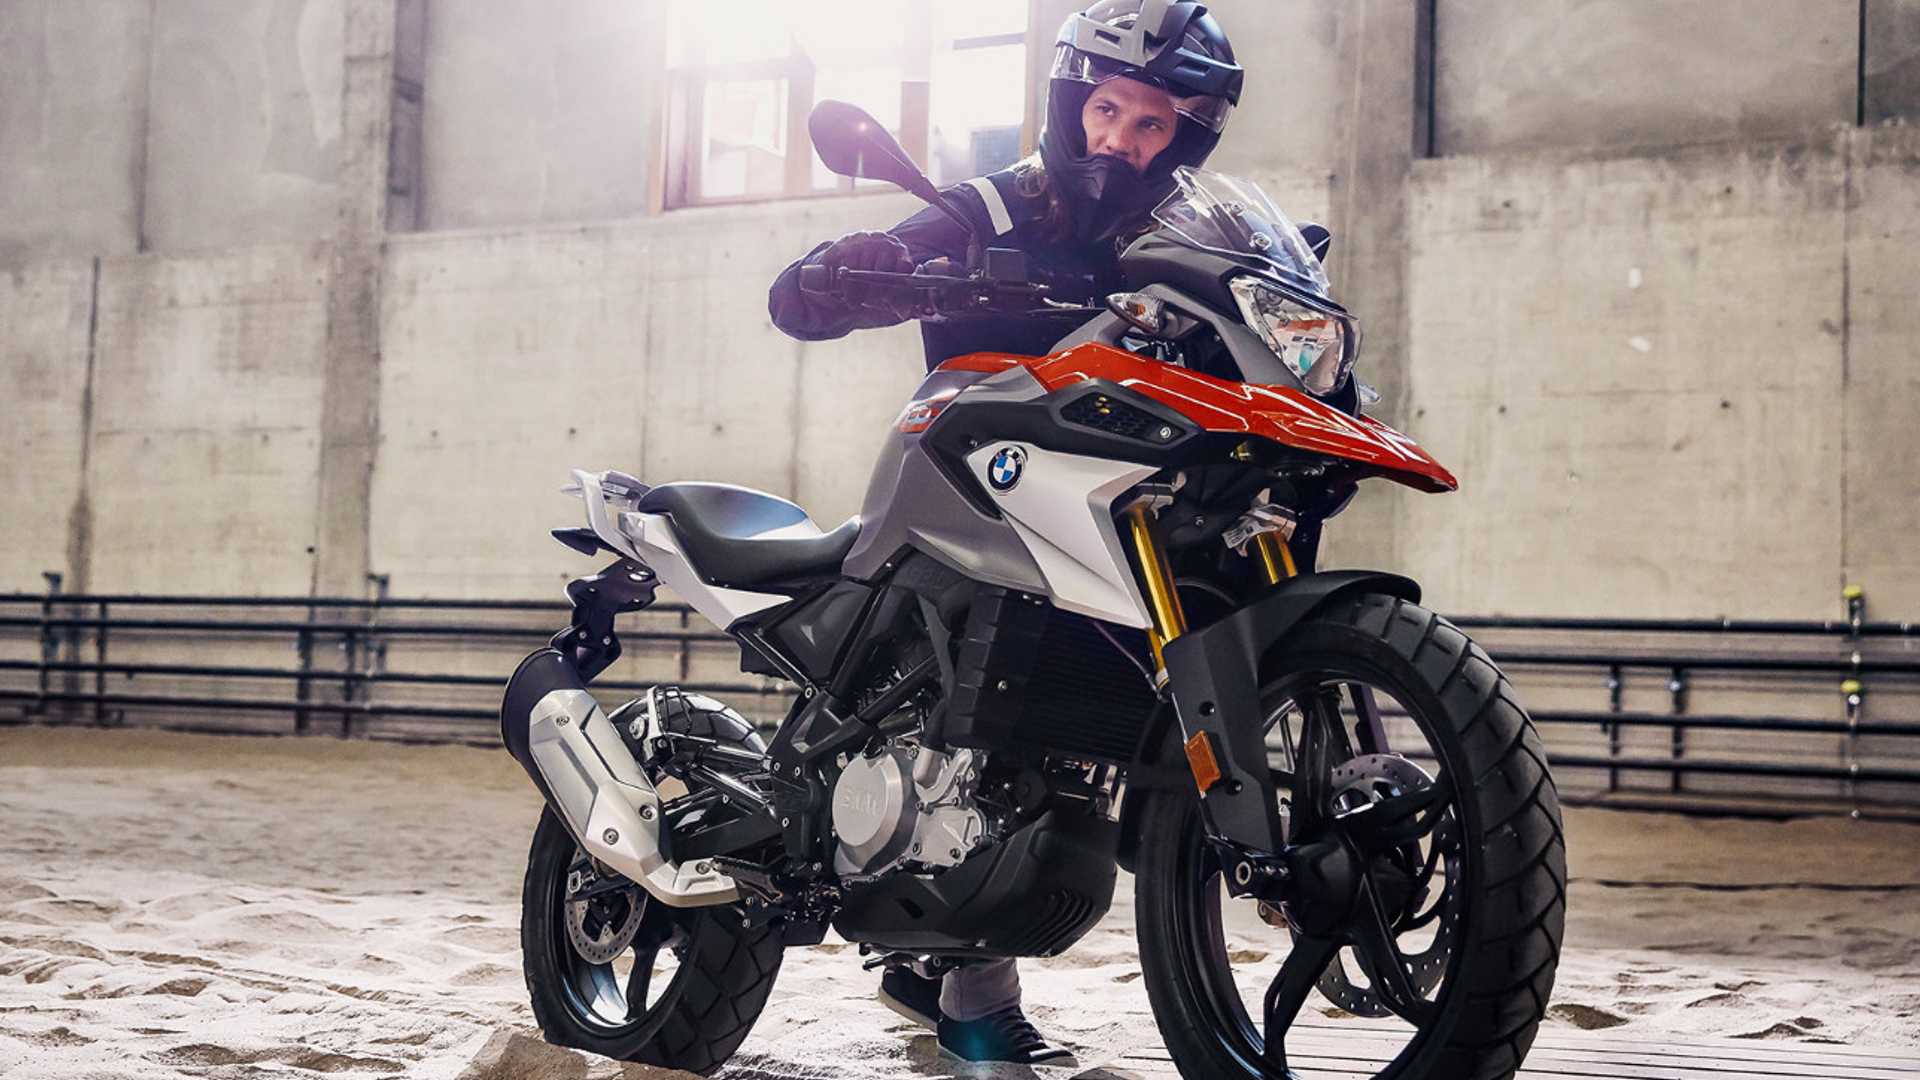 BMW Is About To Host Its First Ever 310 GS Cup In India